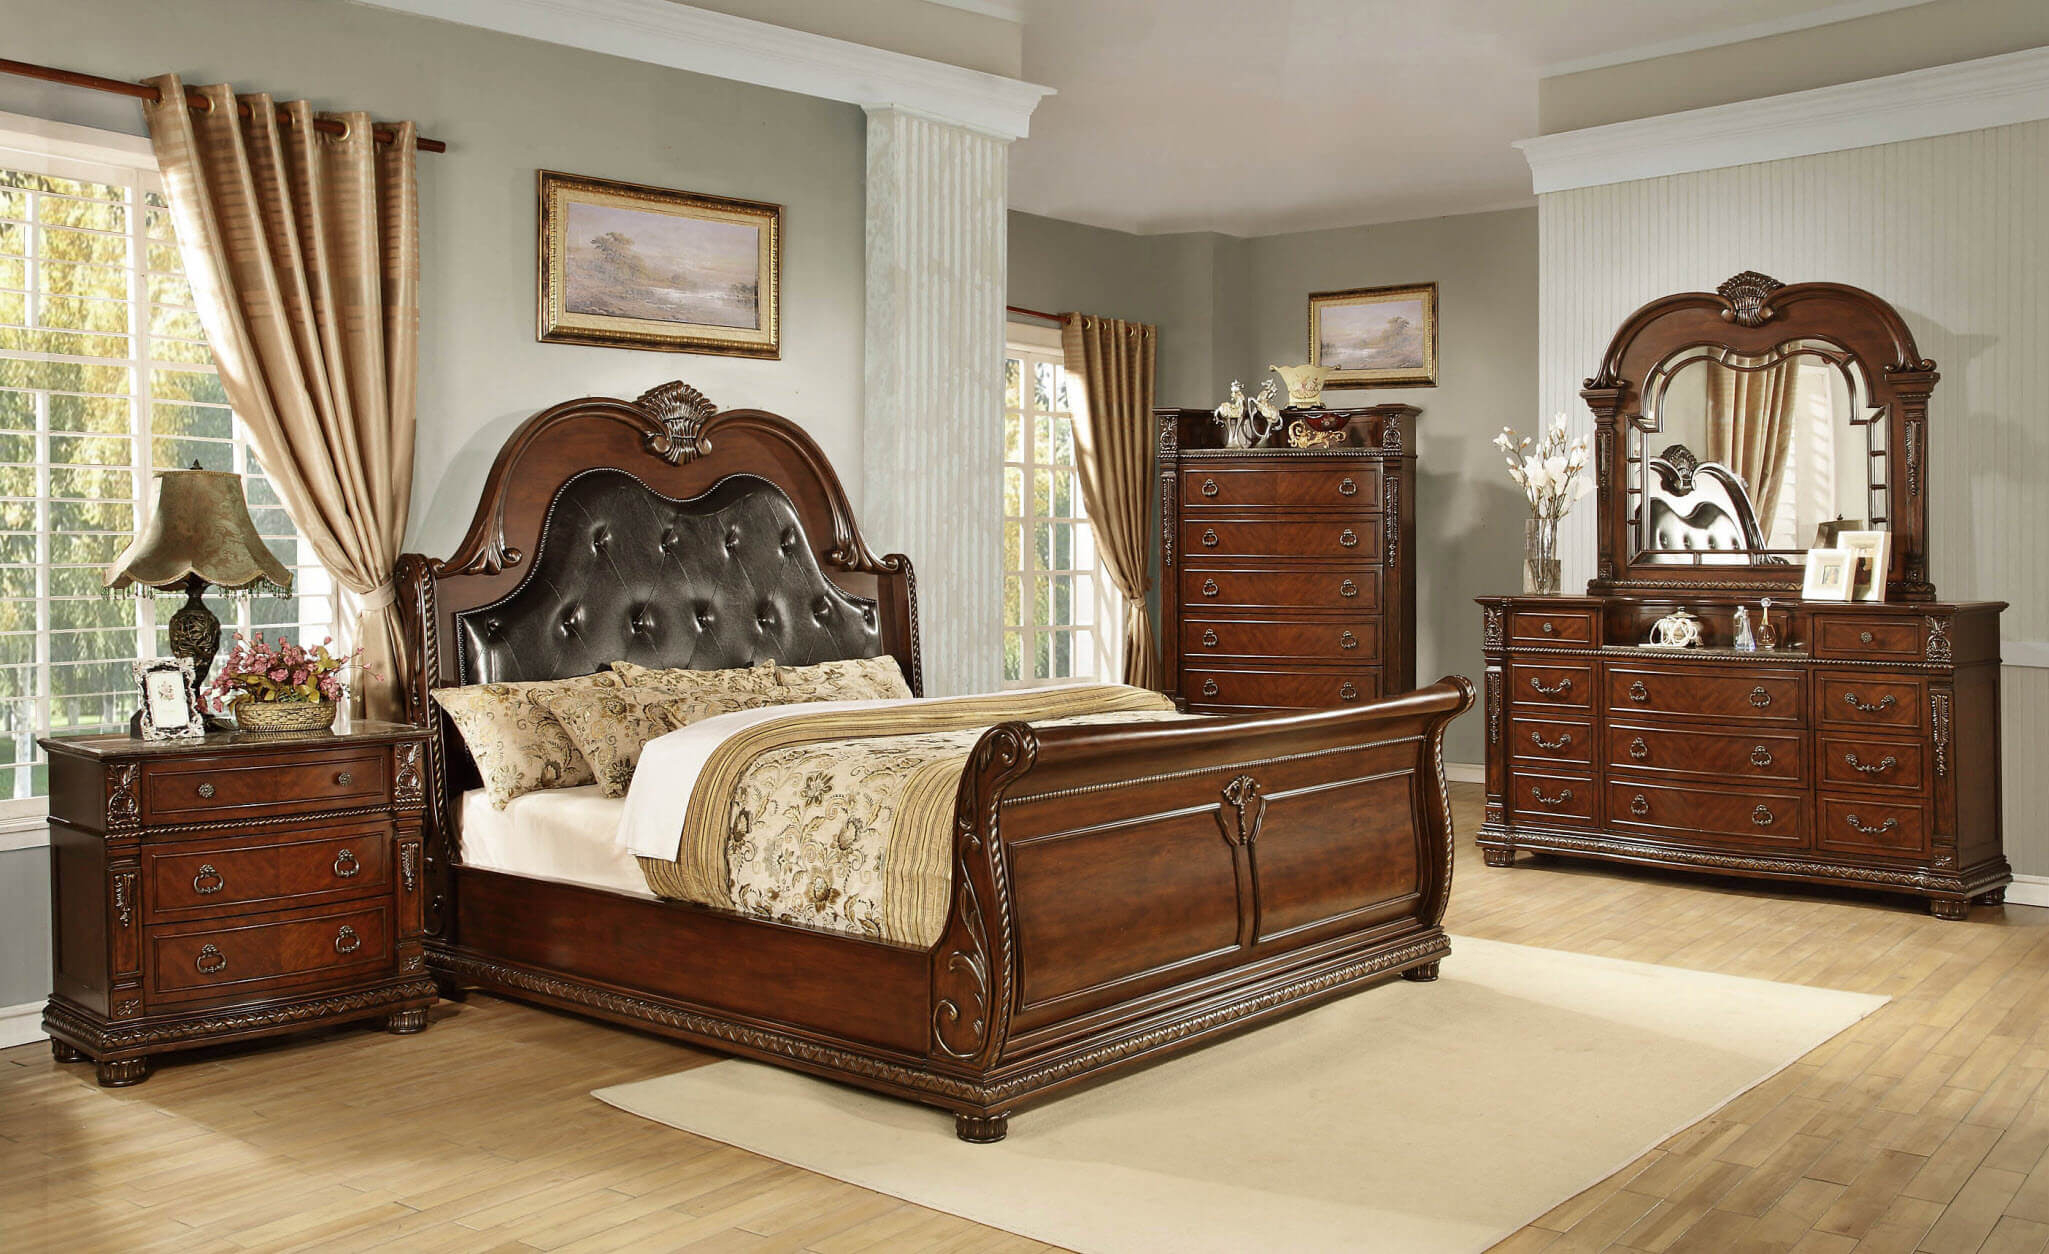 B718 Palace Marble Top Bedroom Set Global Trading inside sizing 2049 X 1254